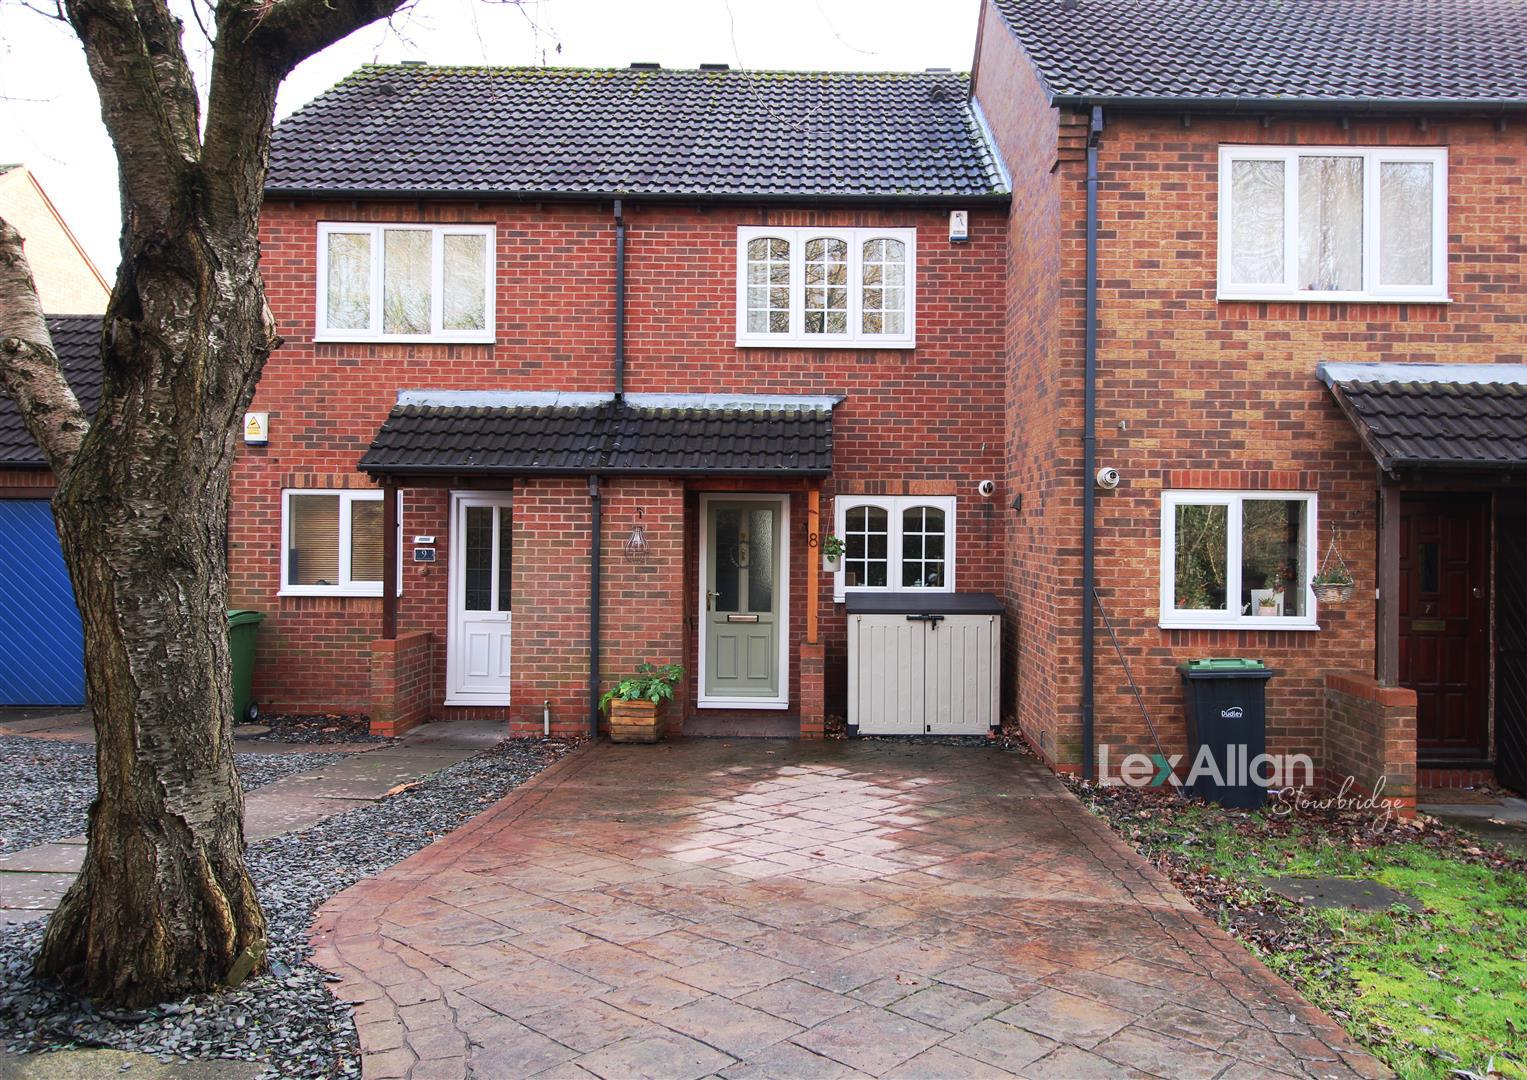 2 bed  for sale in Perrott Gardens, Brierley Hill, DY5 